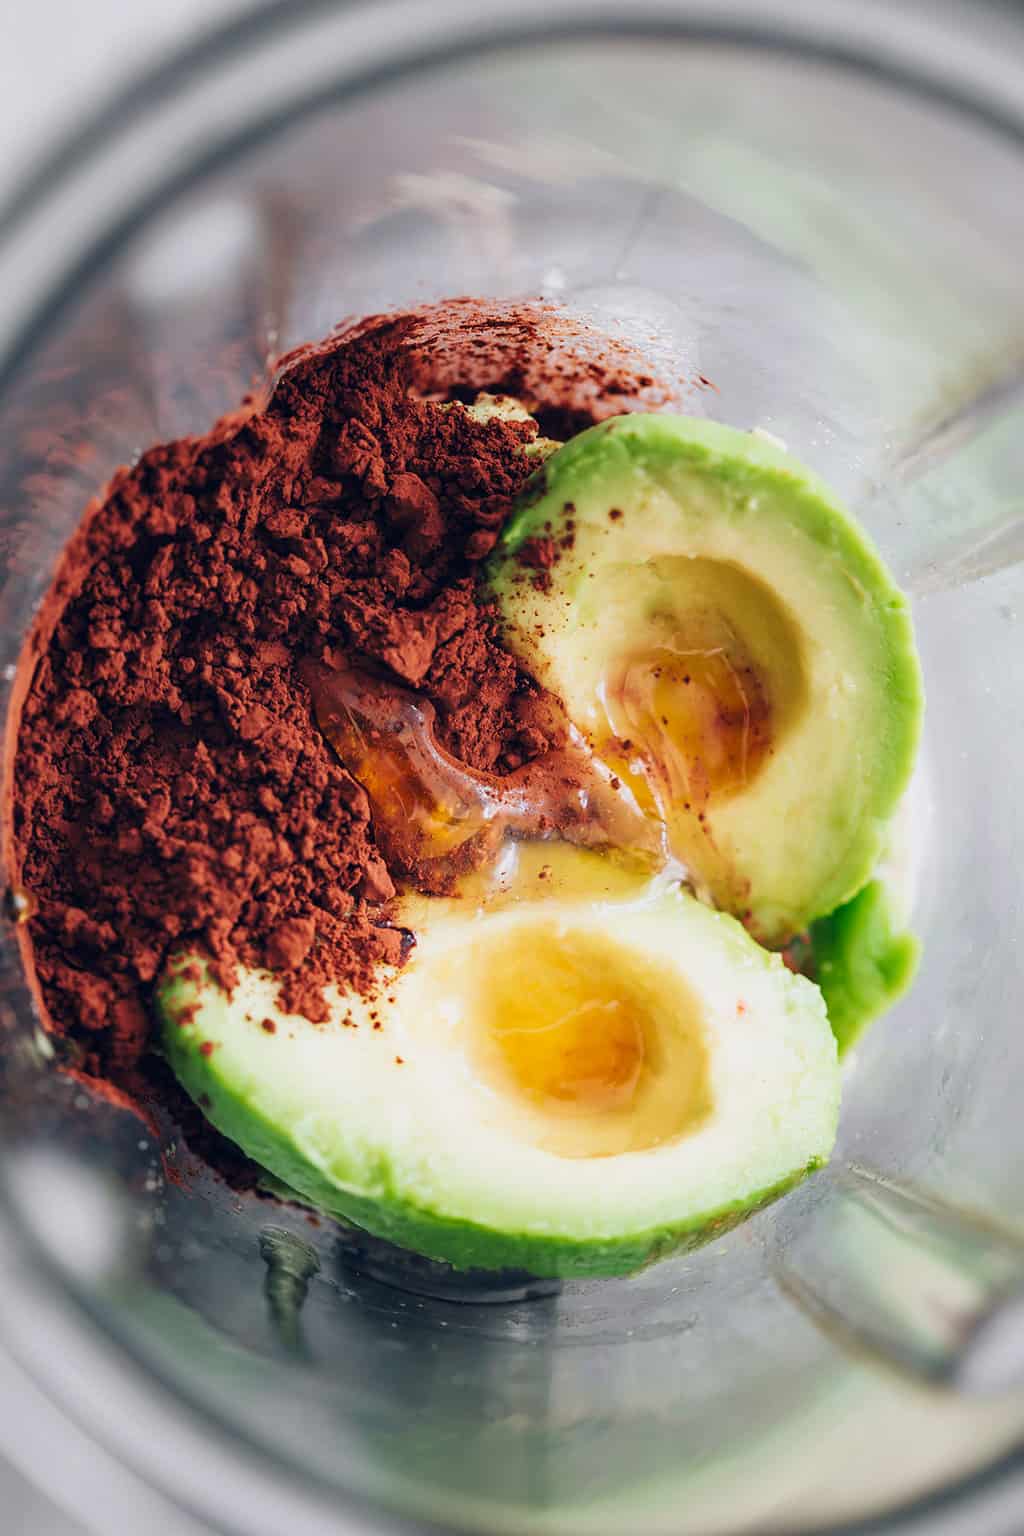 Blending avocado and cocoa for Healthy Vegan Chocolate Mousse